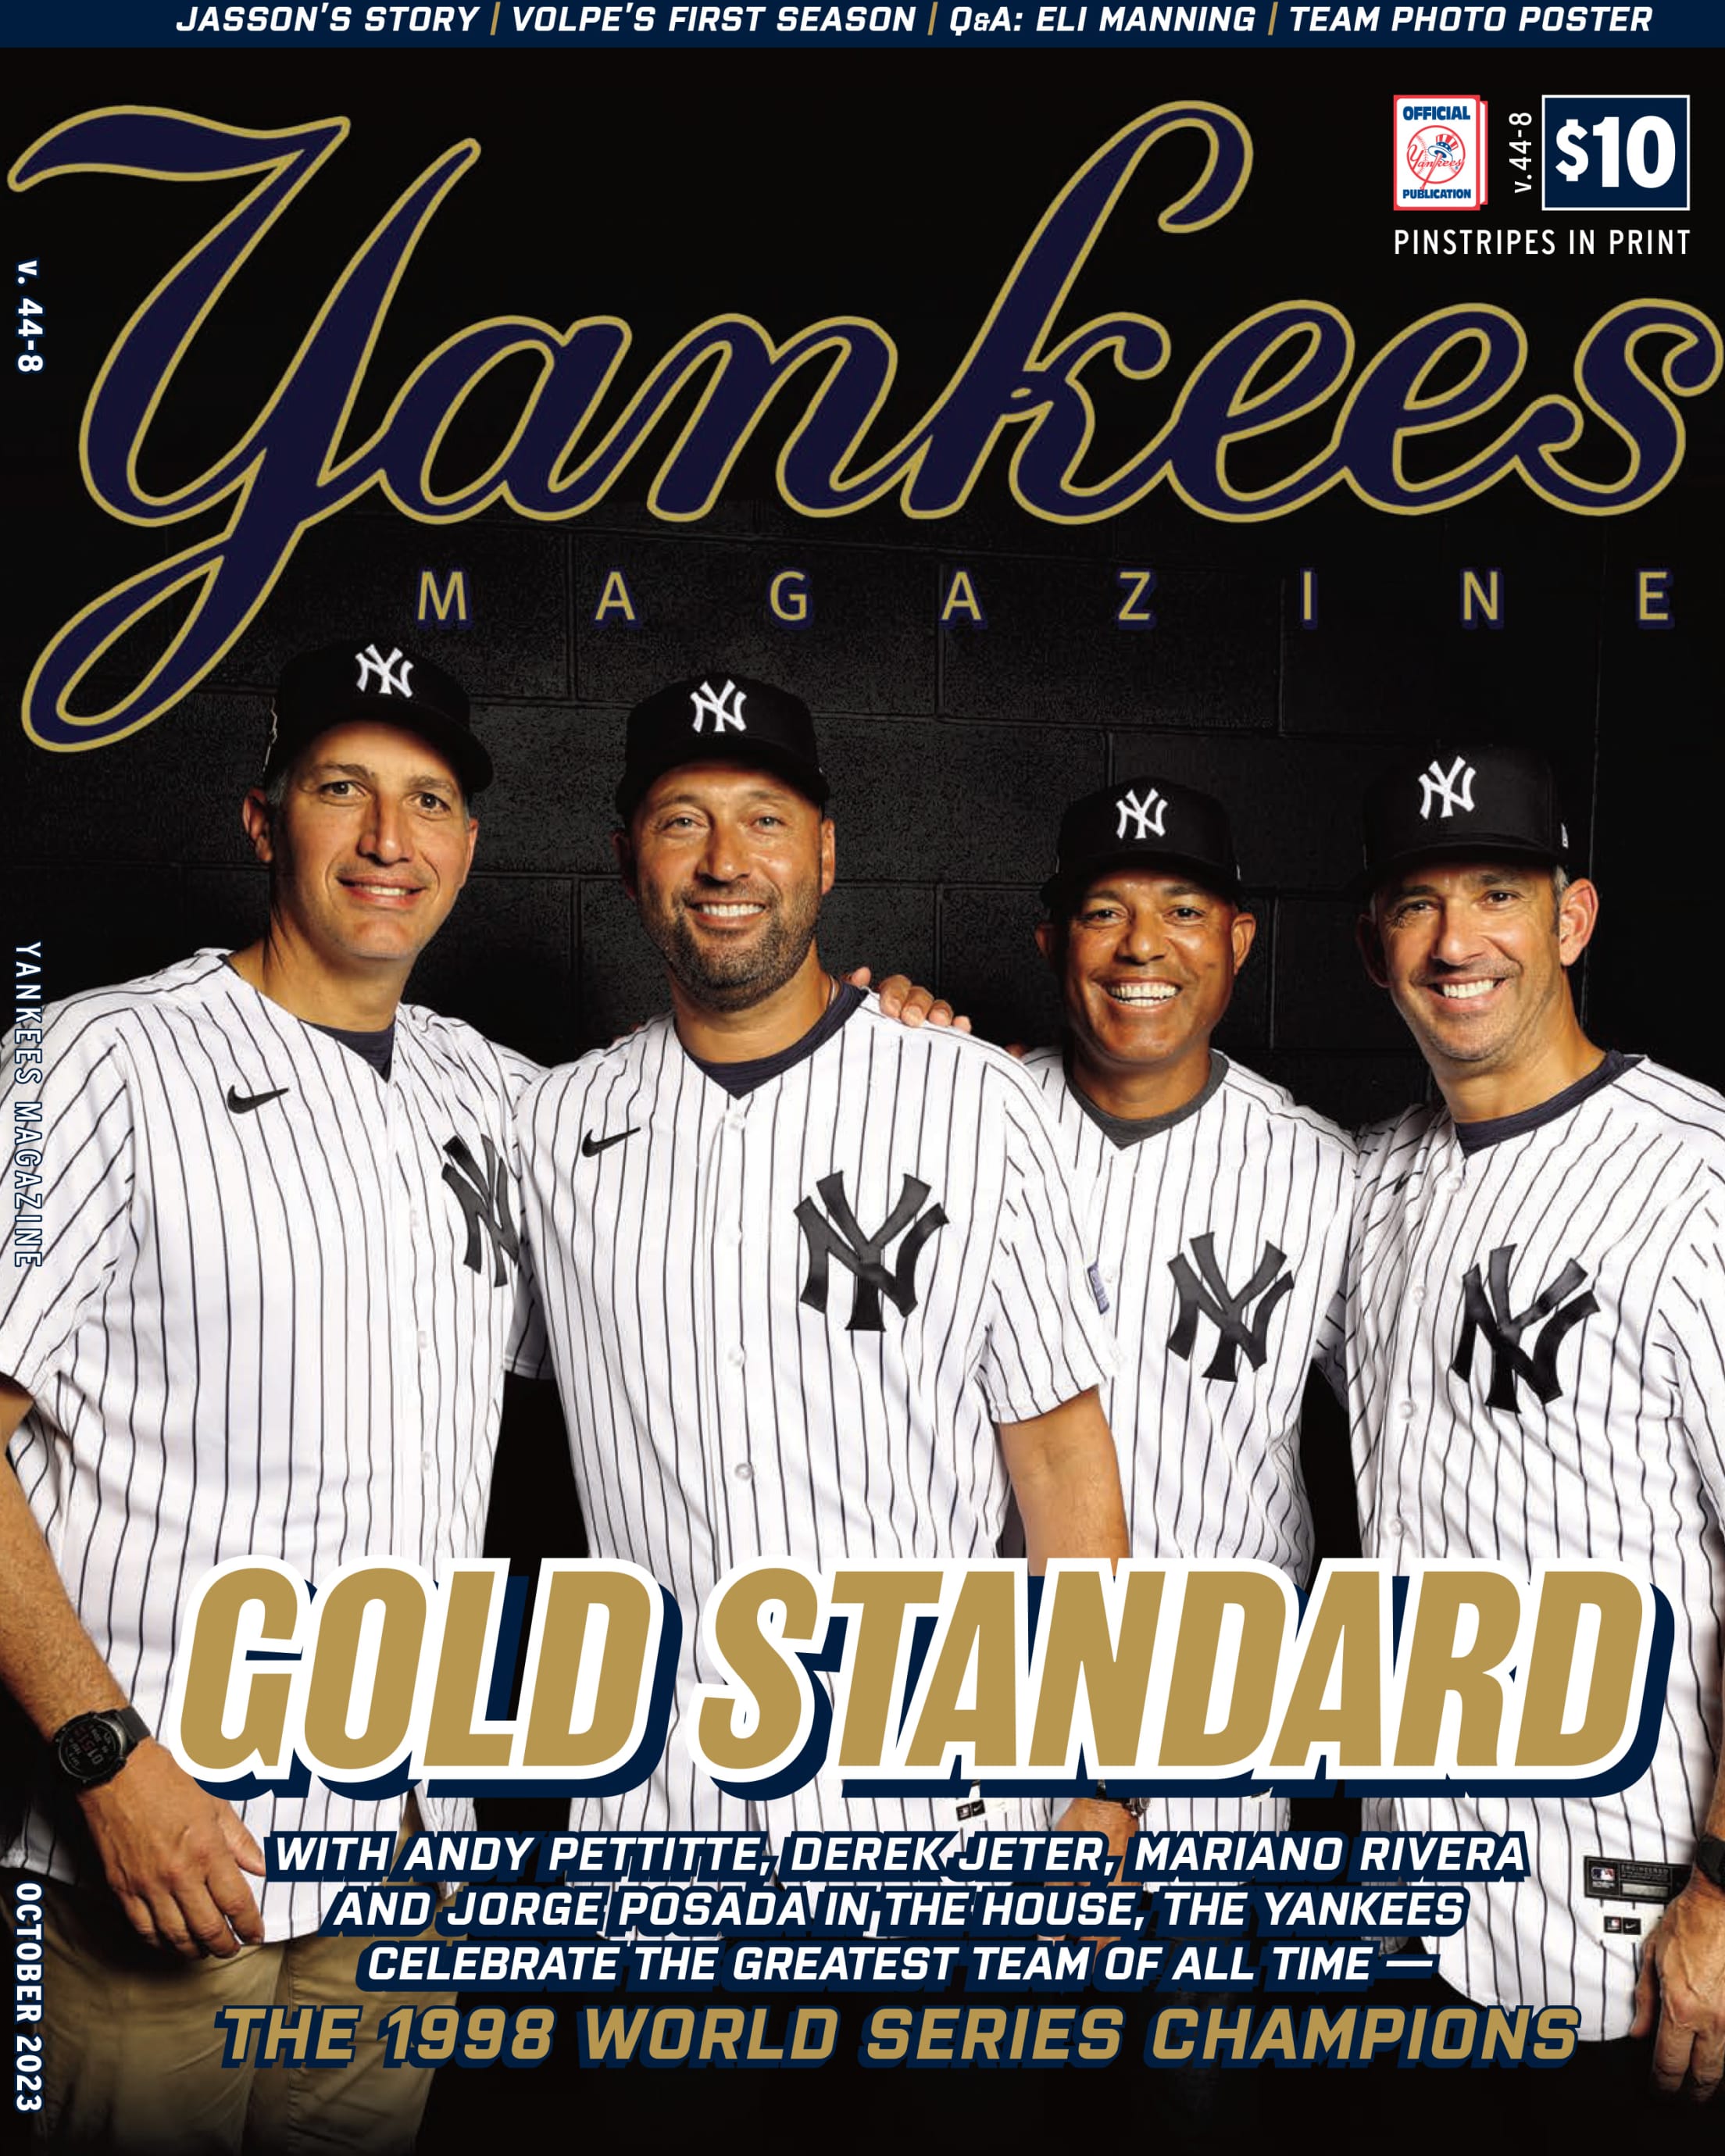 New York Yankees, 2009 World Series Sports Illustrated Cover Poster